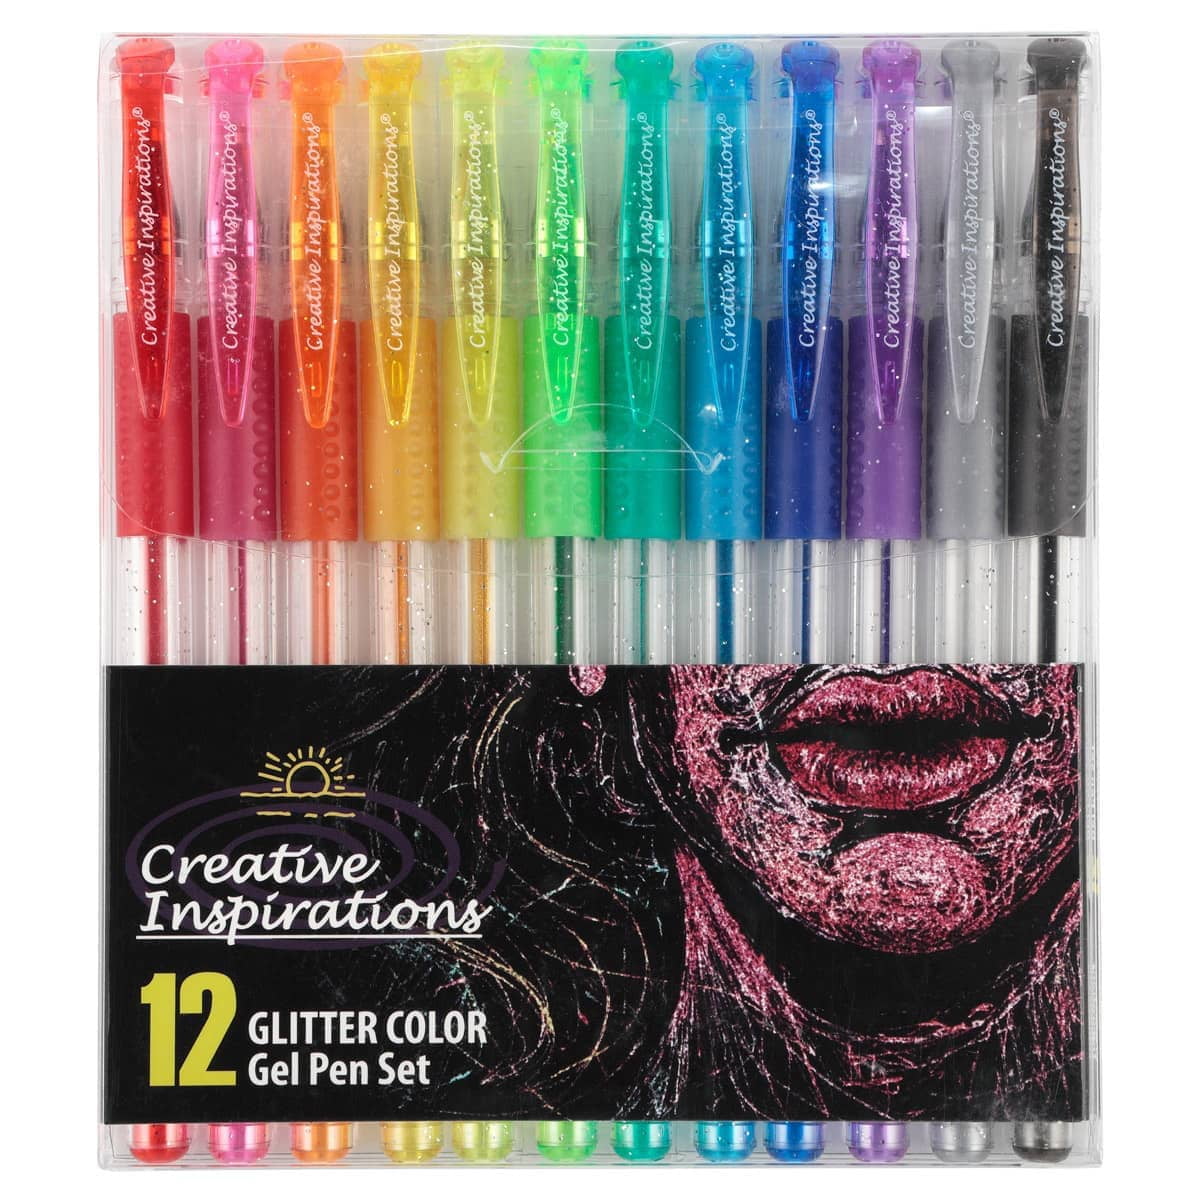 Creative Inspirations Gel Pen Sets - Long Lasting Performance, Vivid, and  Free-Flowing Ink Gel Pens for Artists, Bulk, Students, Classrooms, & More!  - Set of 12 